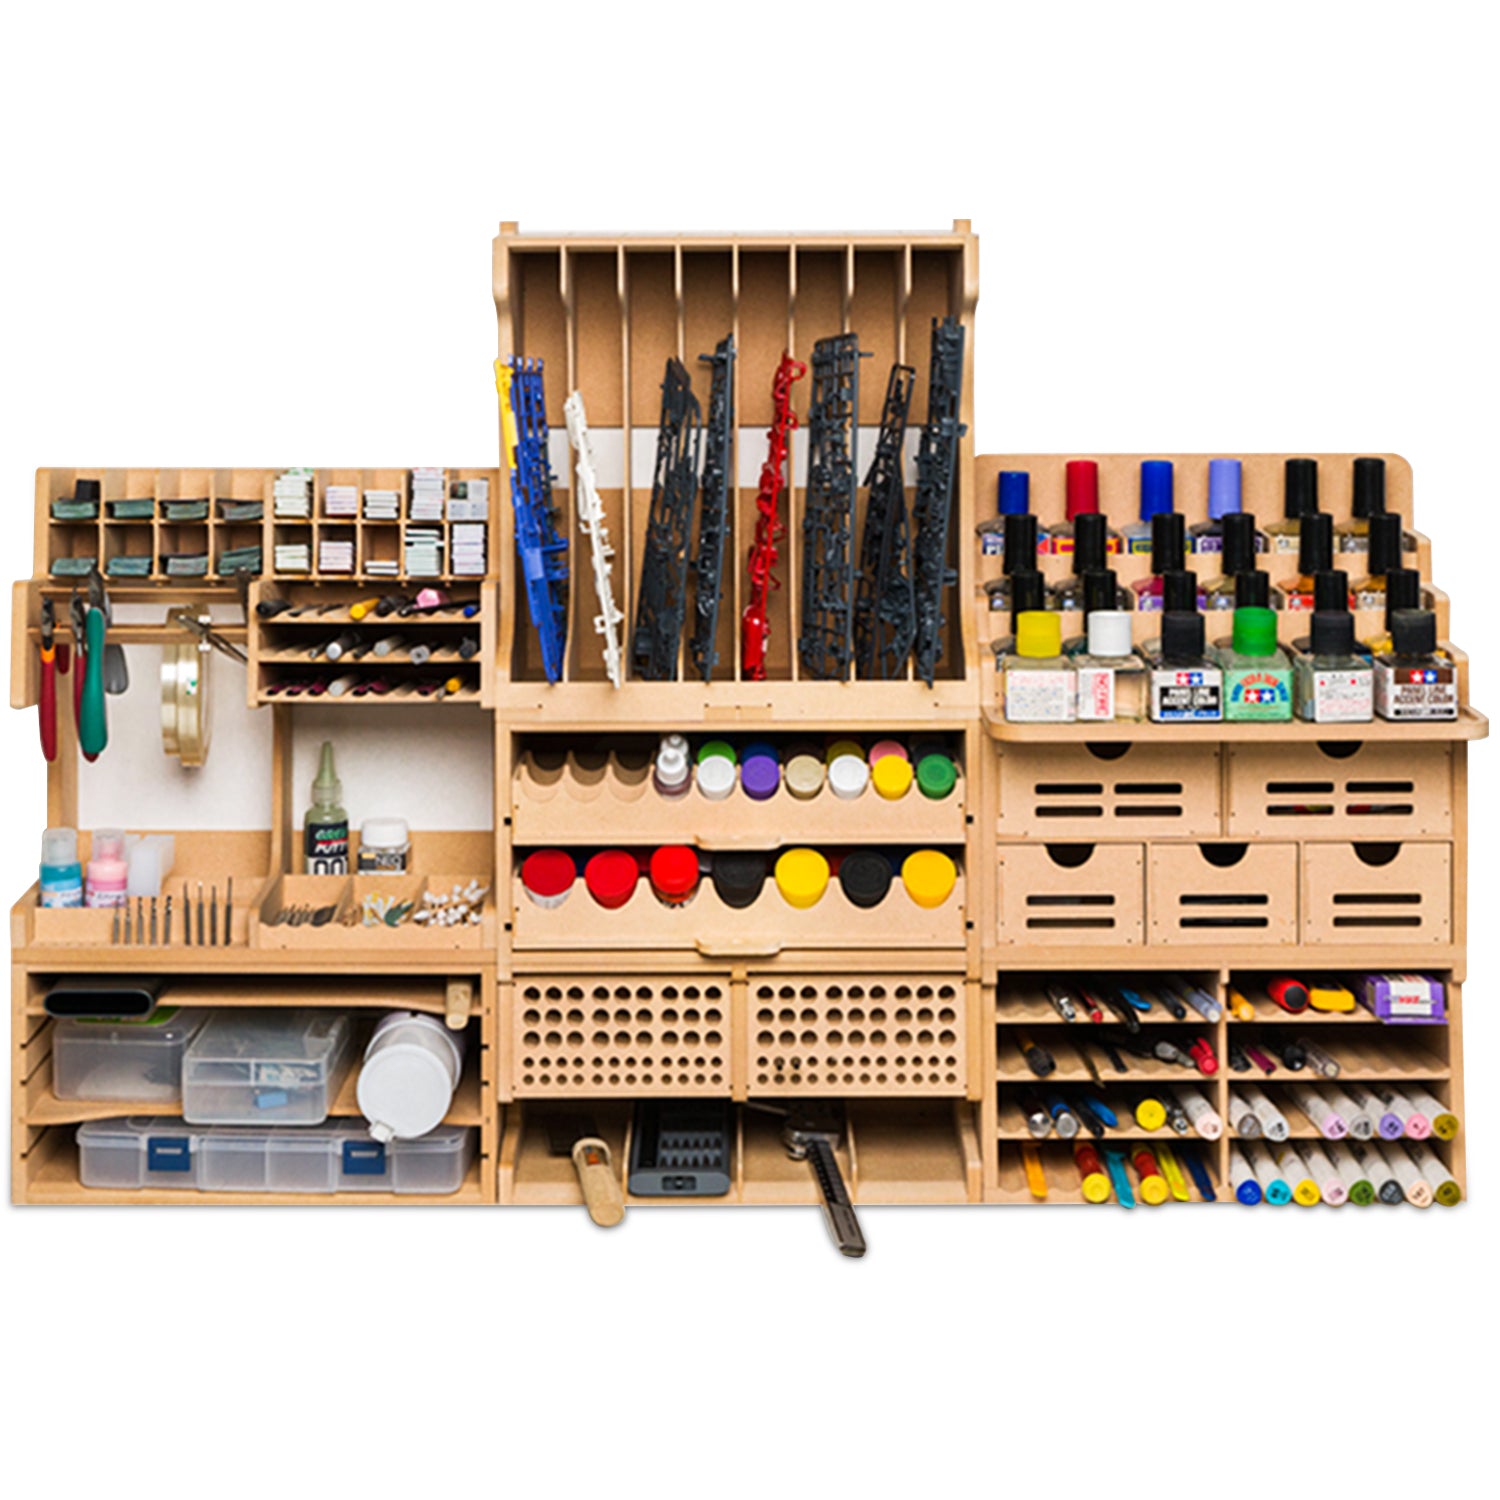 15 Useful Hobby Paint Storage Racks and Organizers - Tangible Day